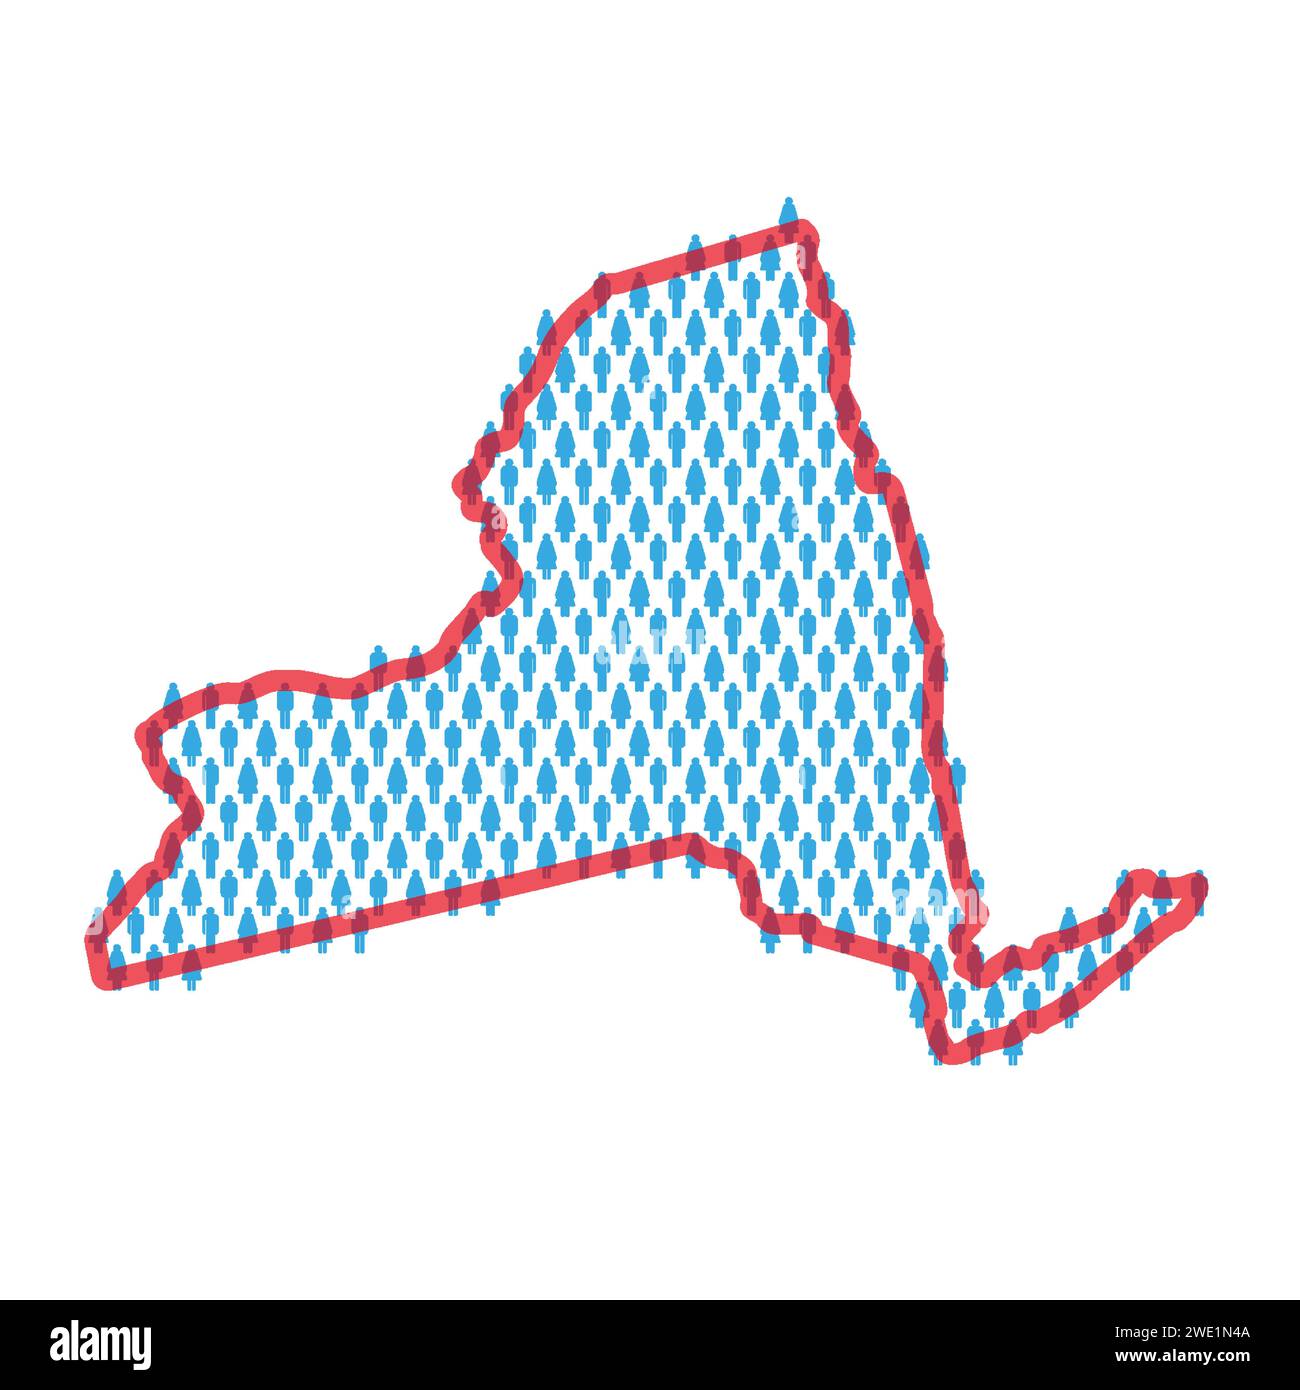 New York population map. Stick figures people map with bold red translucent state border. Pattern of men and women icons. Isolated vector illustration Stock Vector